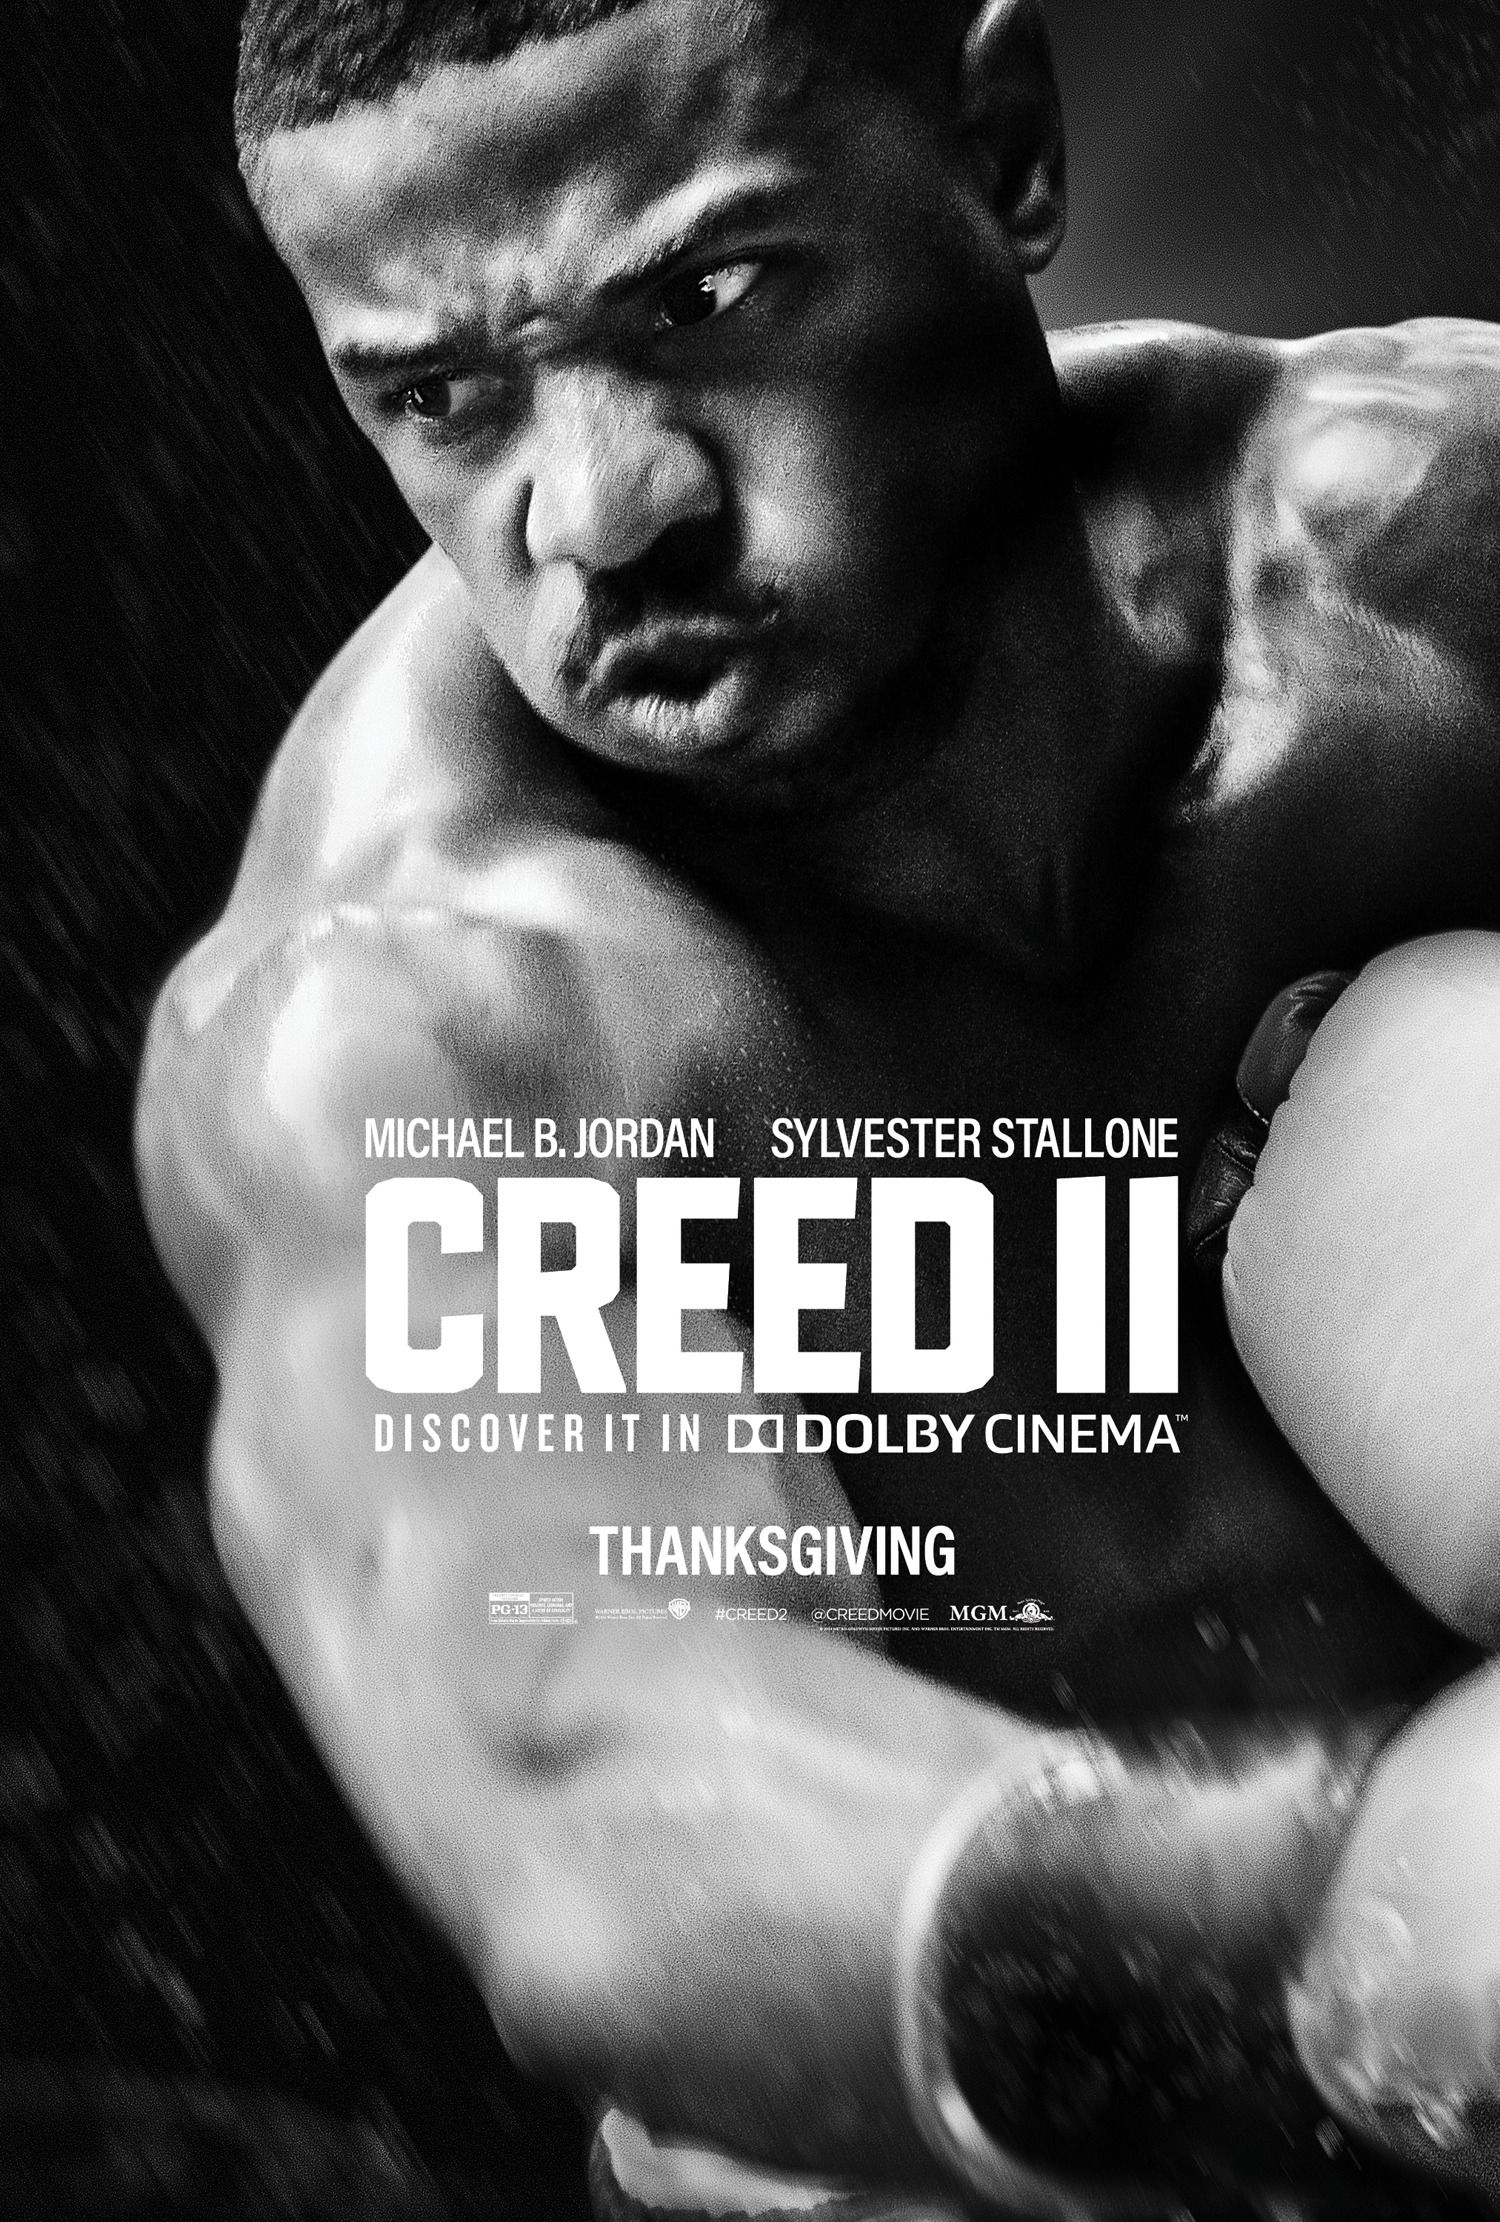 Adonis Creed Wallpapers Wallpaper Cave